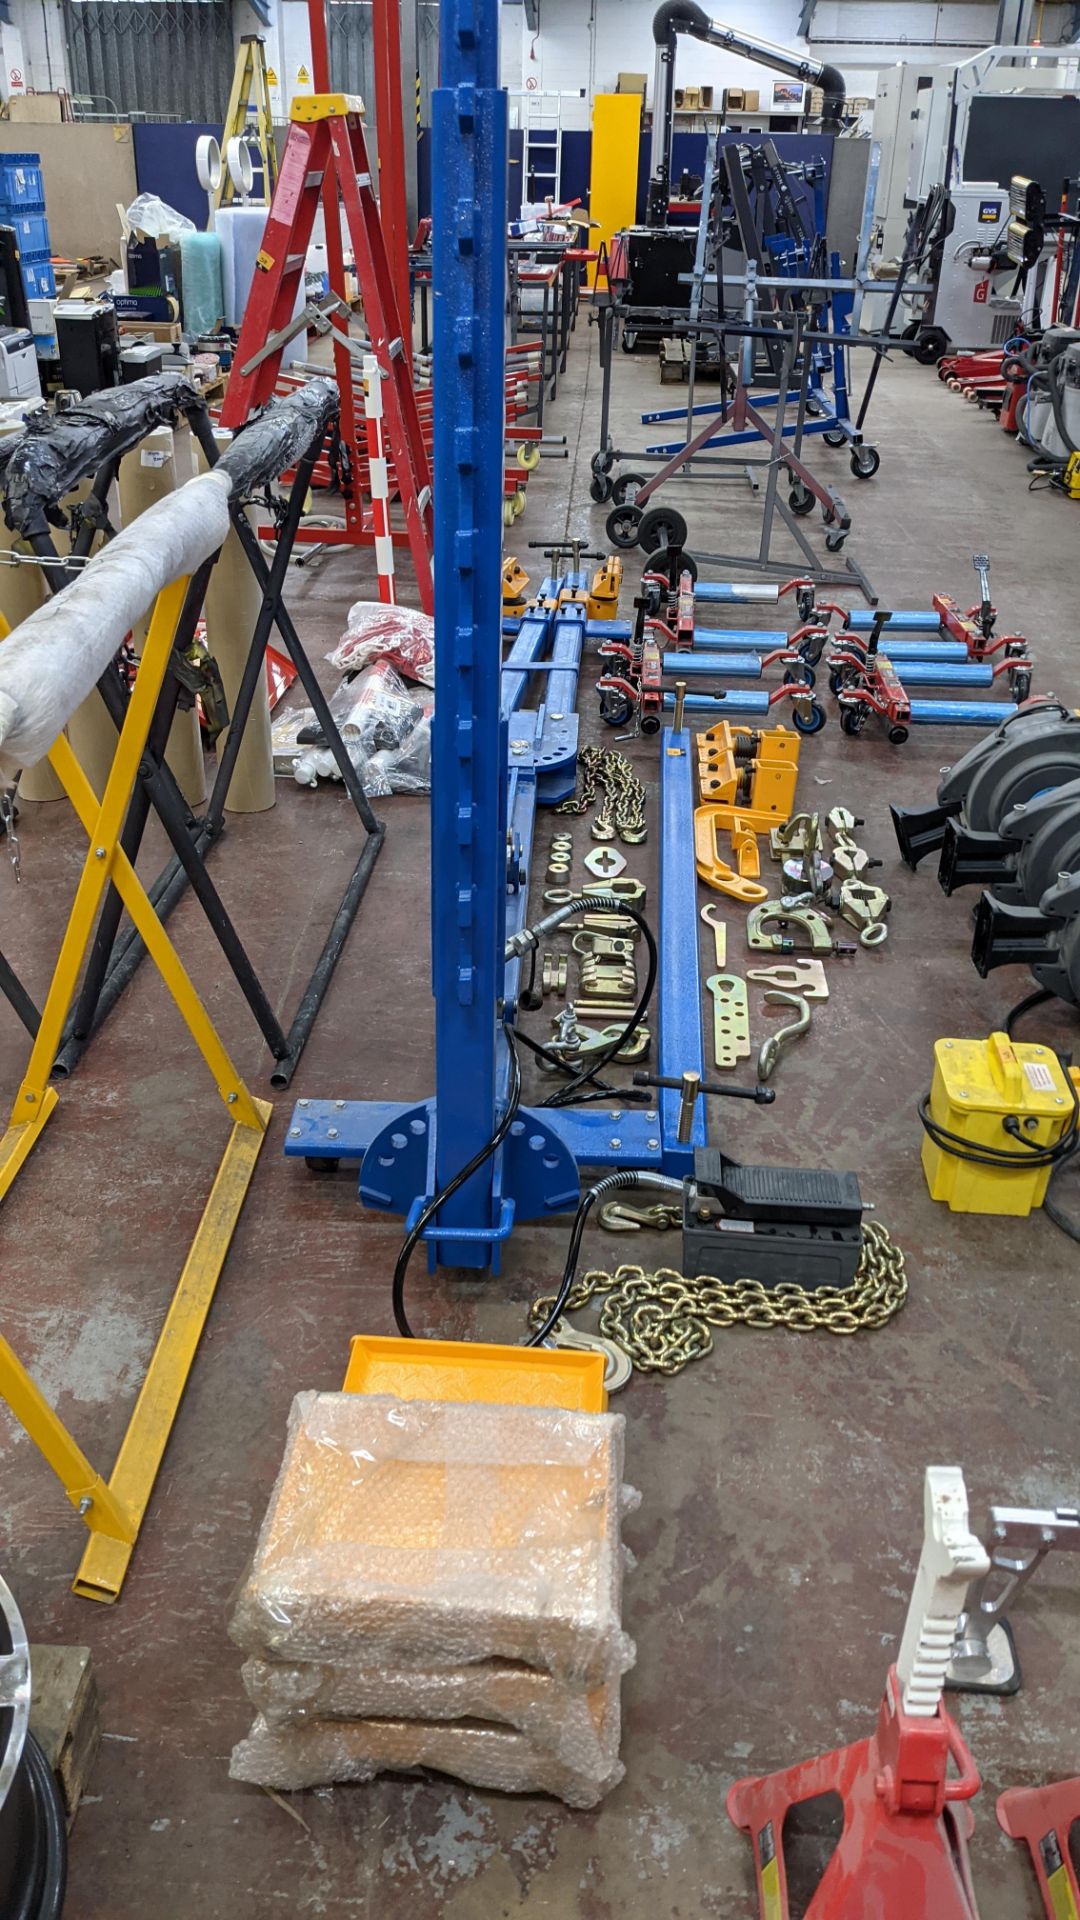 2019 AA4C auto repair bench model AA-ACR169. Please note this lot comprises the large blue metal fr - Image 11 of 32